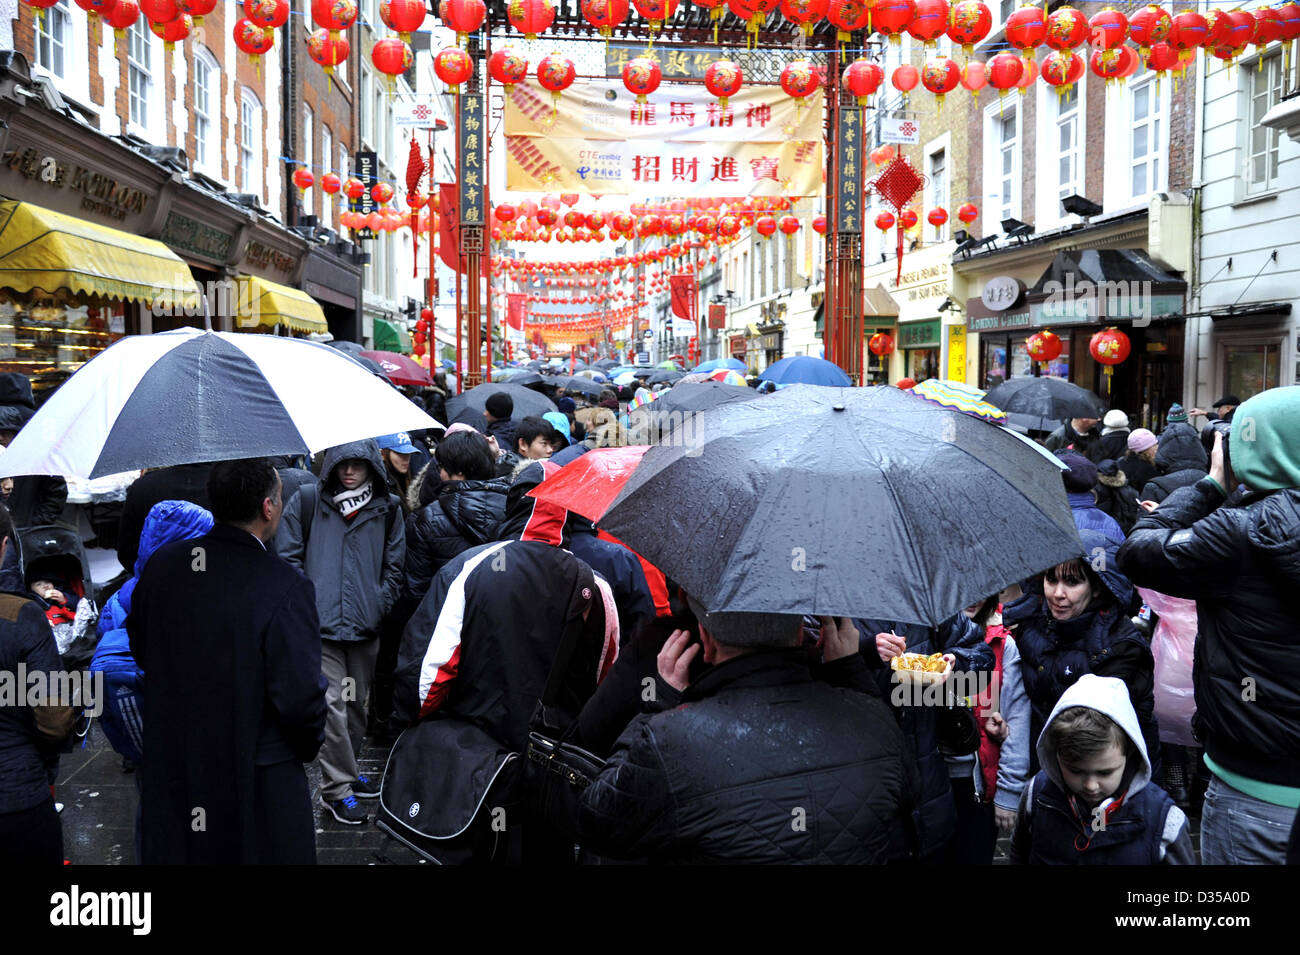 London 10th February 2013.  A sea of umbrellas shield crowds of people from the rain in Gerrard Street Chinatown as they celebrate the Chinese New Year. This is the year of the snake.  Thousands of people lined the streets to se the colourful parade and sample Chinese food despite the cold wet weather. Stock Photo